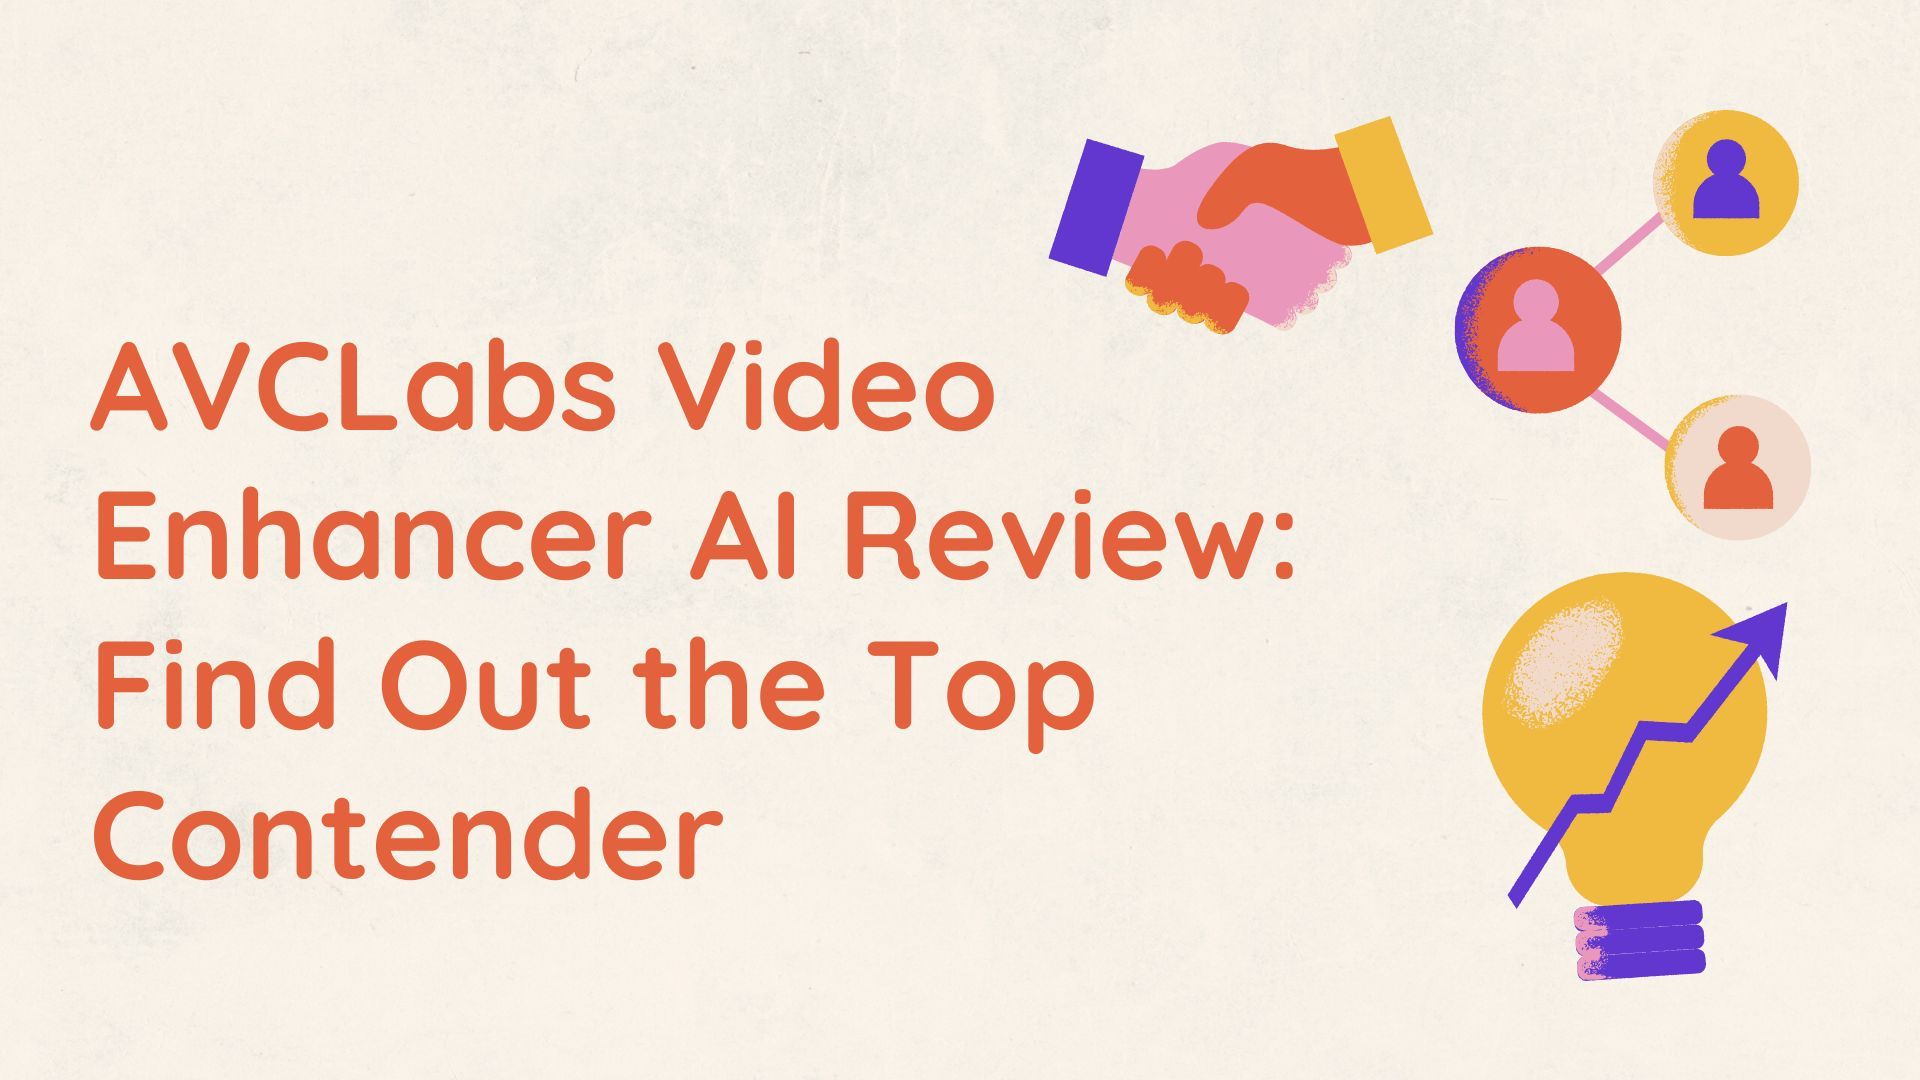 AVCLabs Video Enhancer AI Review: Find Out the Top Contender